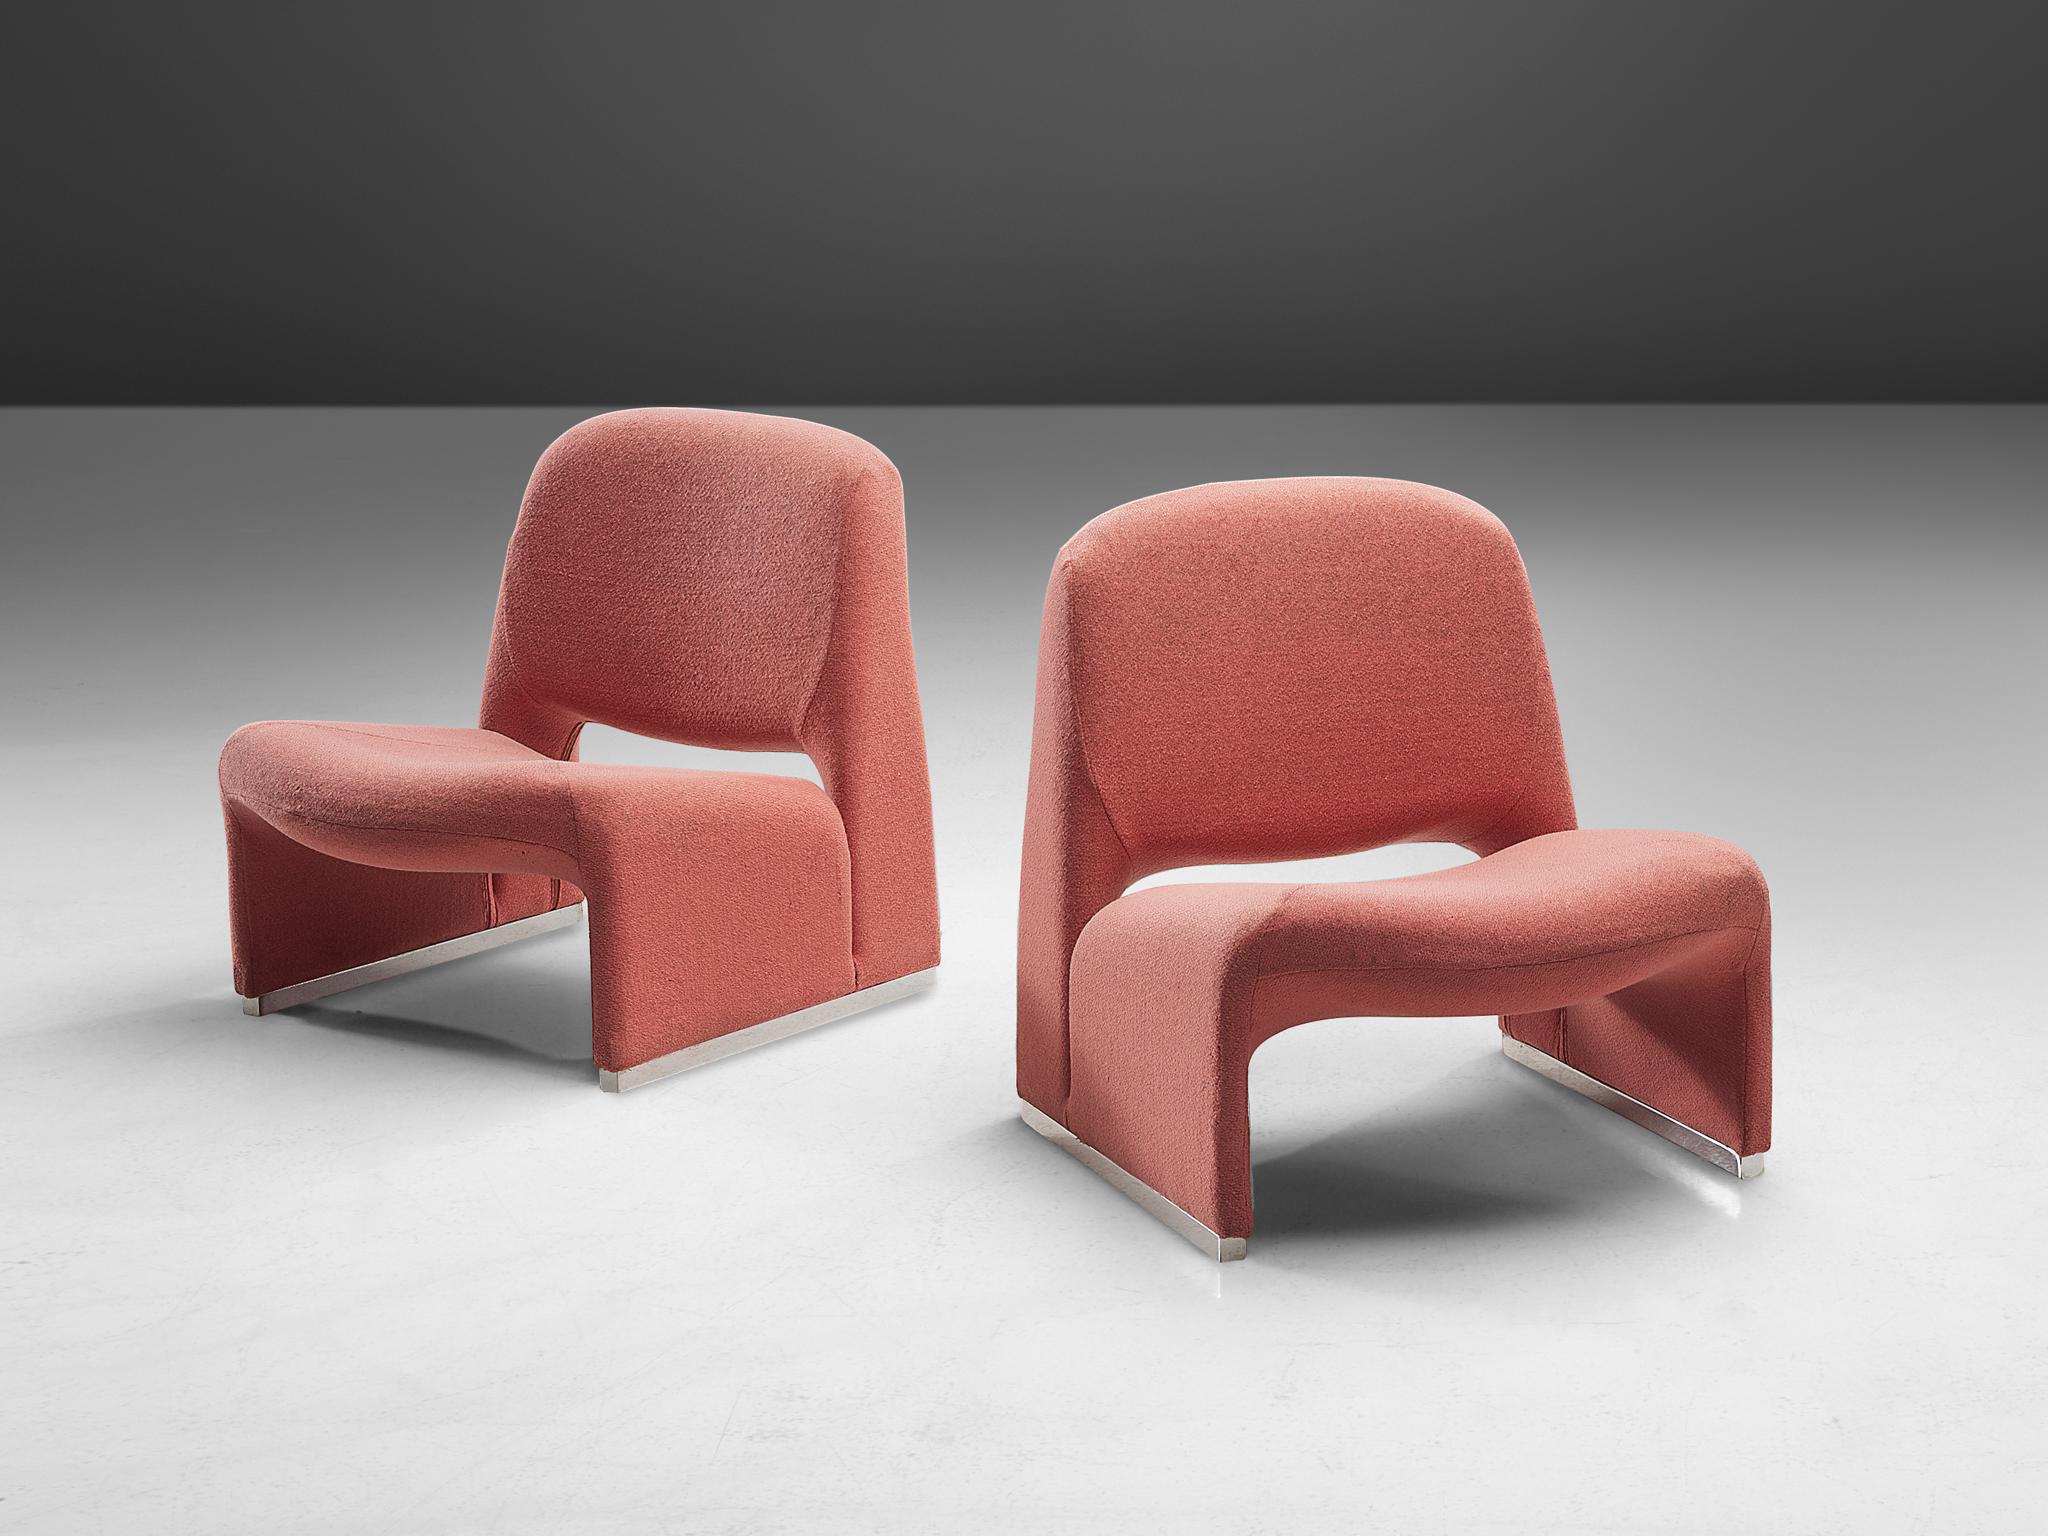 Lounge chairs, pink fabric, metal, Italy, 1970s

These lounge chairs strongly remind of Giancarlo Piretti’s ‘Alky’ lounge chair (1969), yet they feature characteristic differences. Whereas the ‘Alky’ lounge chair consists of one shell, these chairs